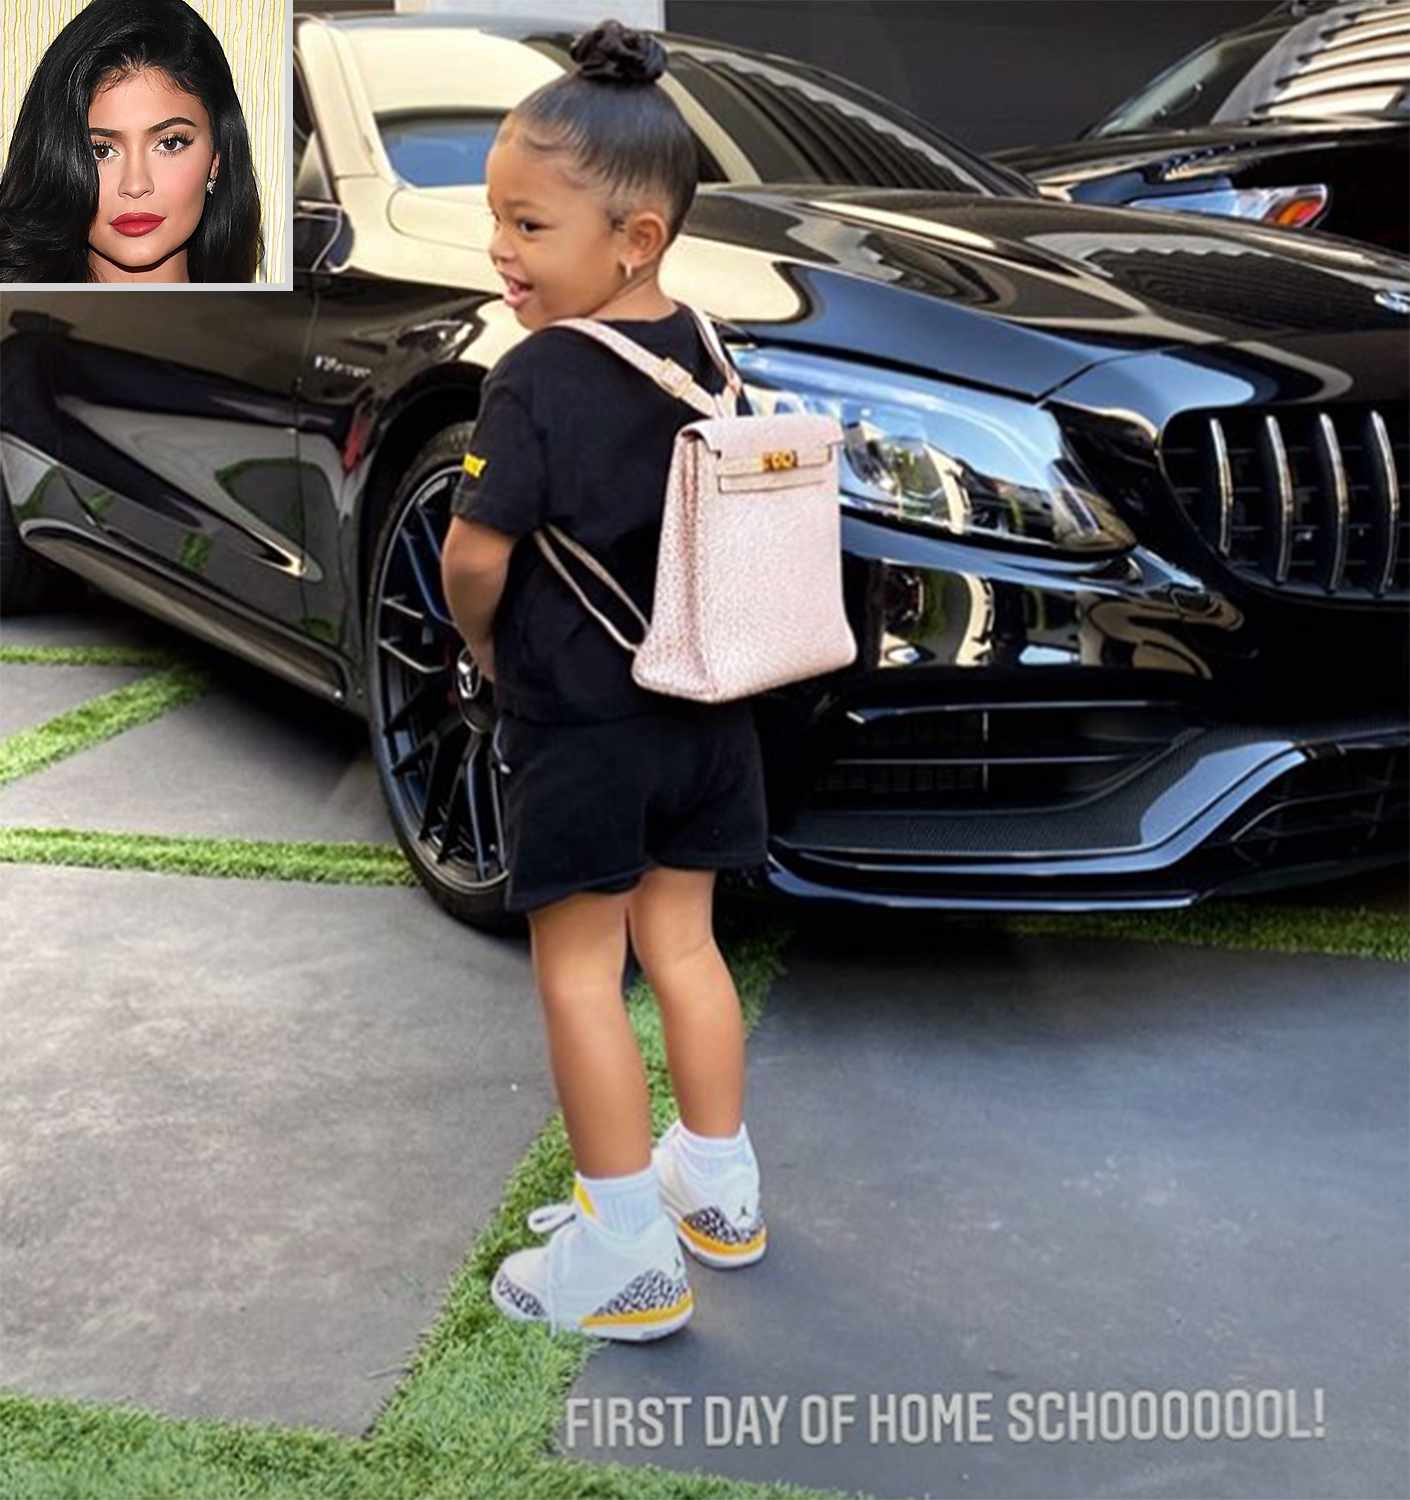 Kylie Jenner Shares Sweet Snap of Stormi on 'First Day of Homeschool' — with an Hermès Backpack! - PEOPLE